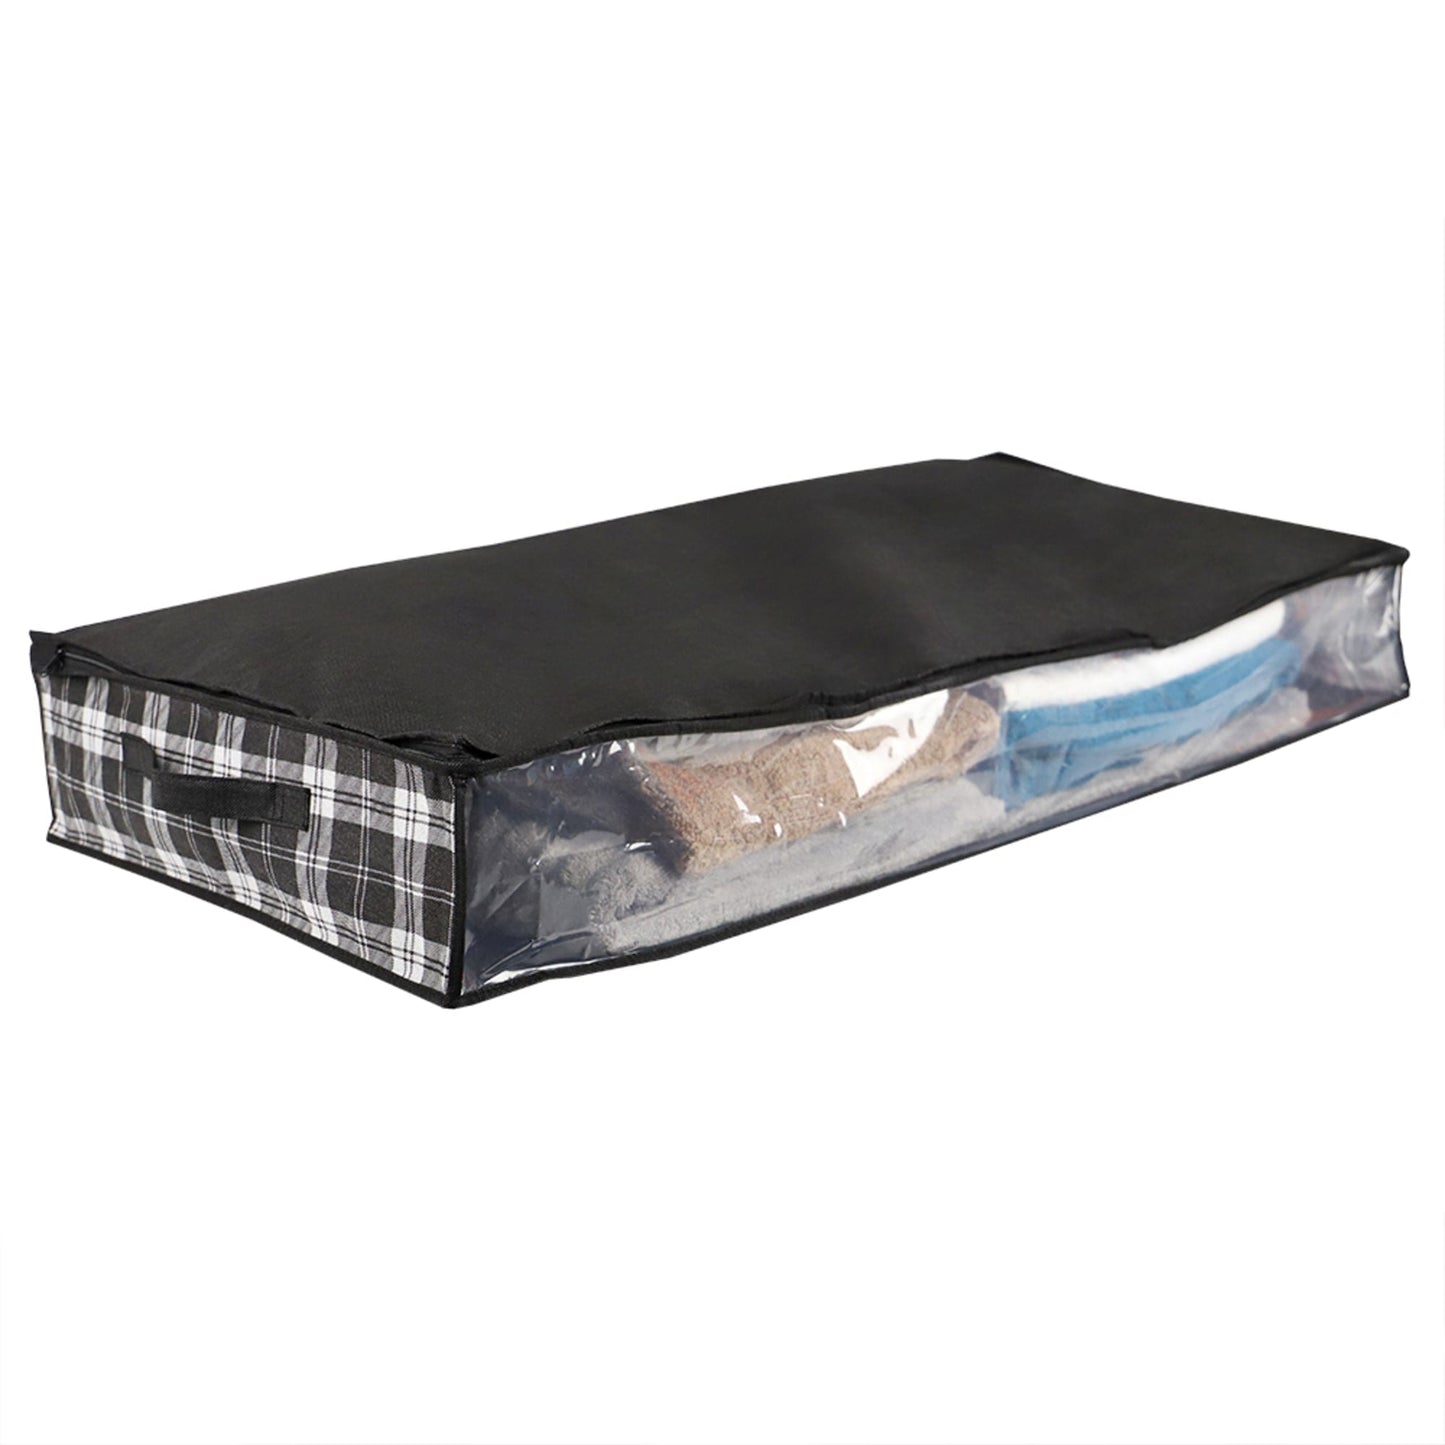 Plaid Non-Woven Under the Bed Storage Bag with See-through Front Panel, Black